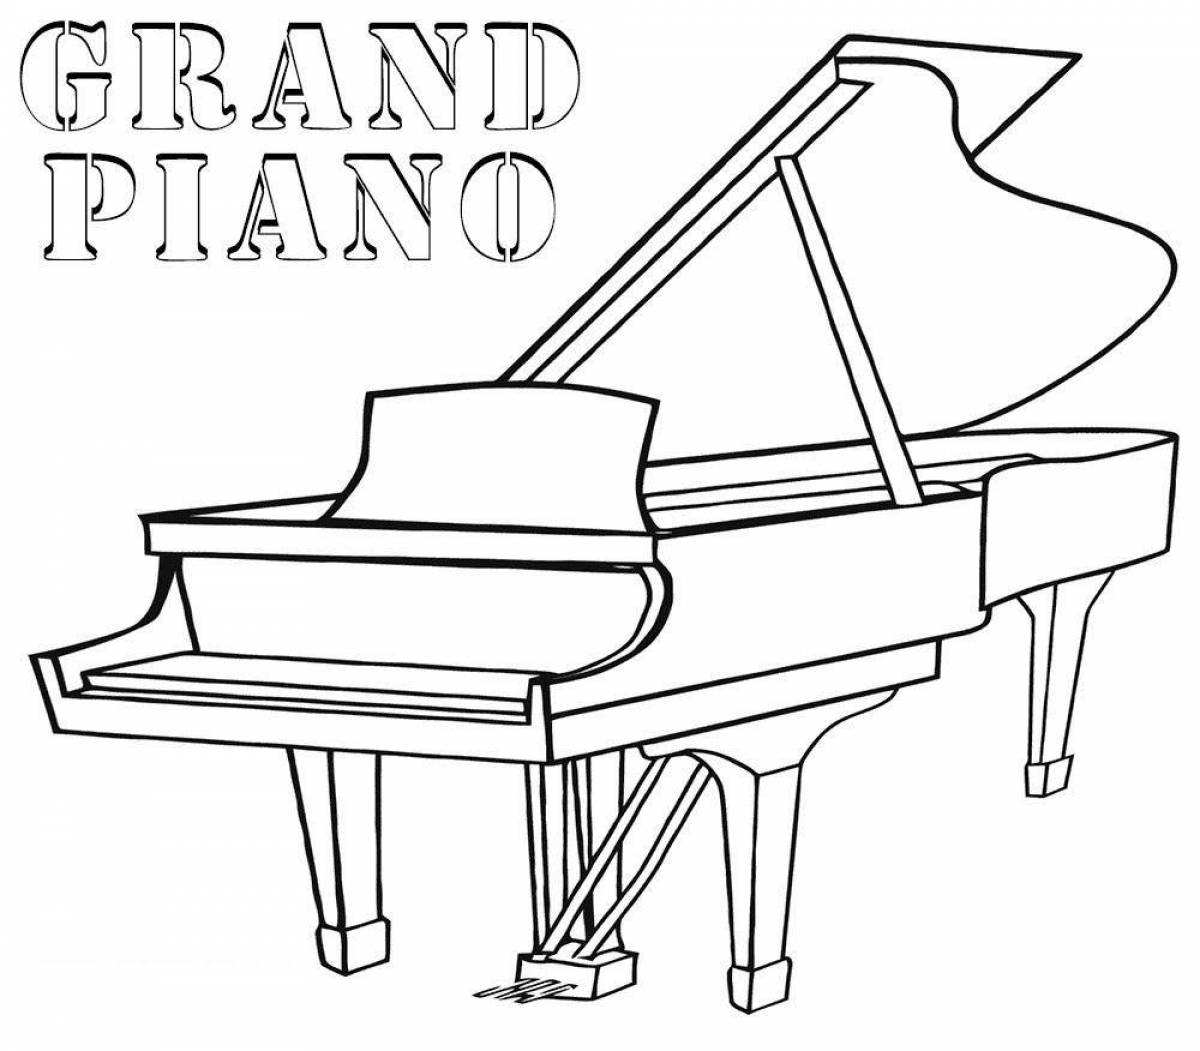 Exciting piano coloring